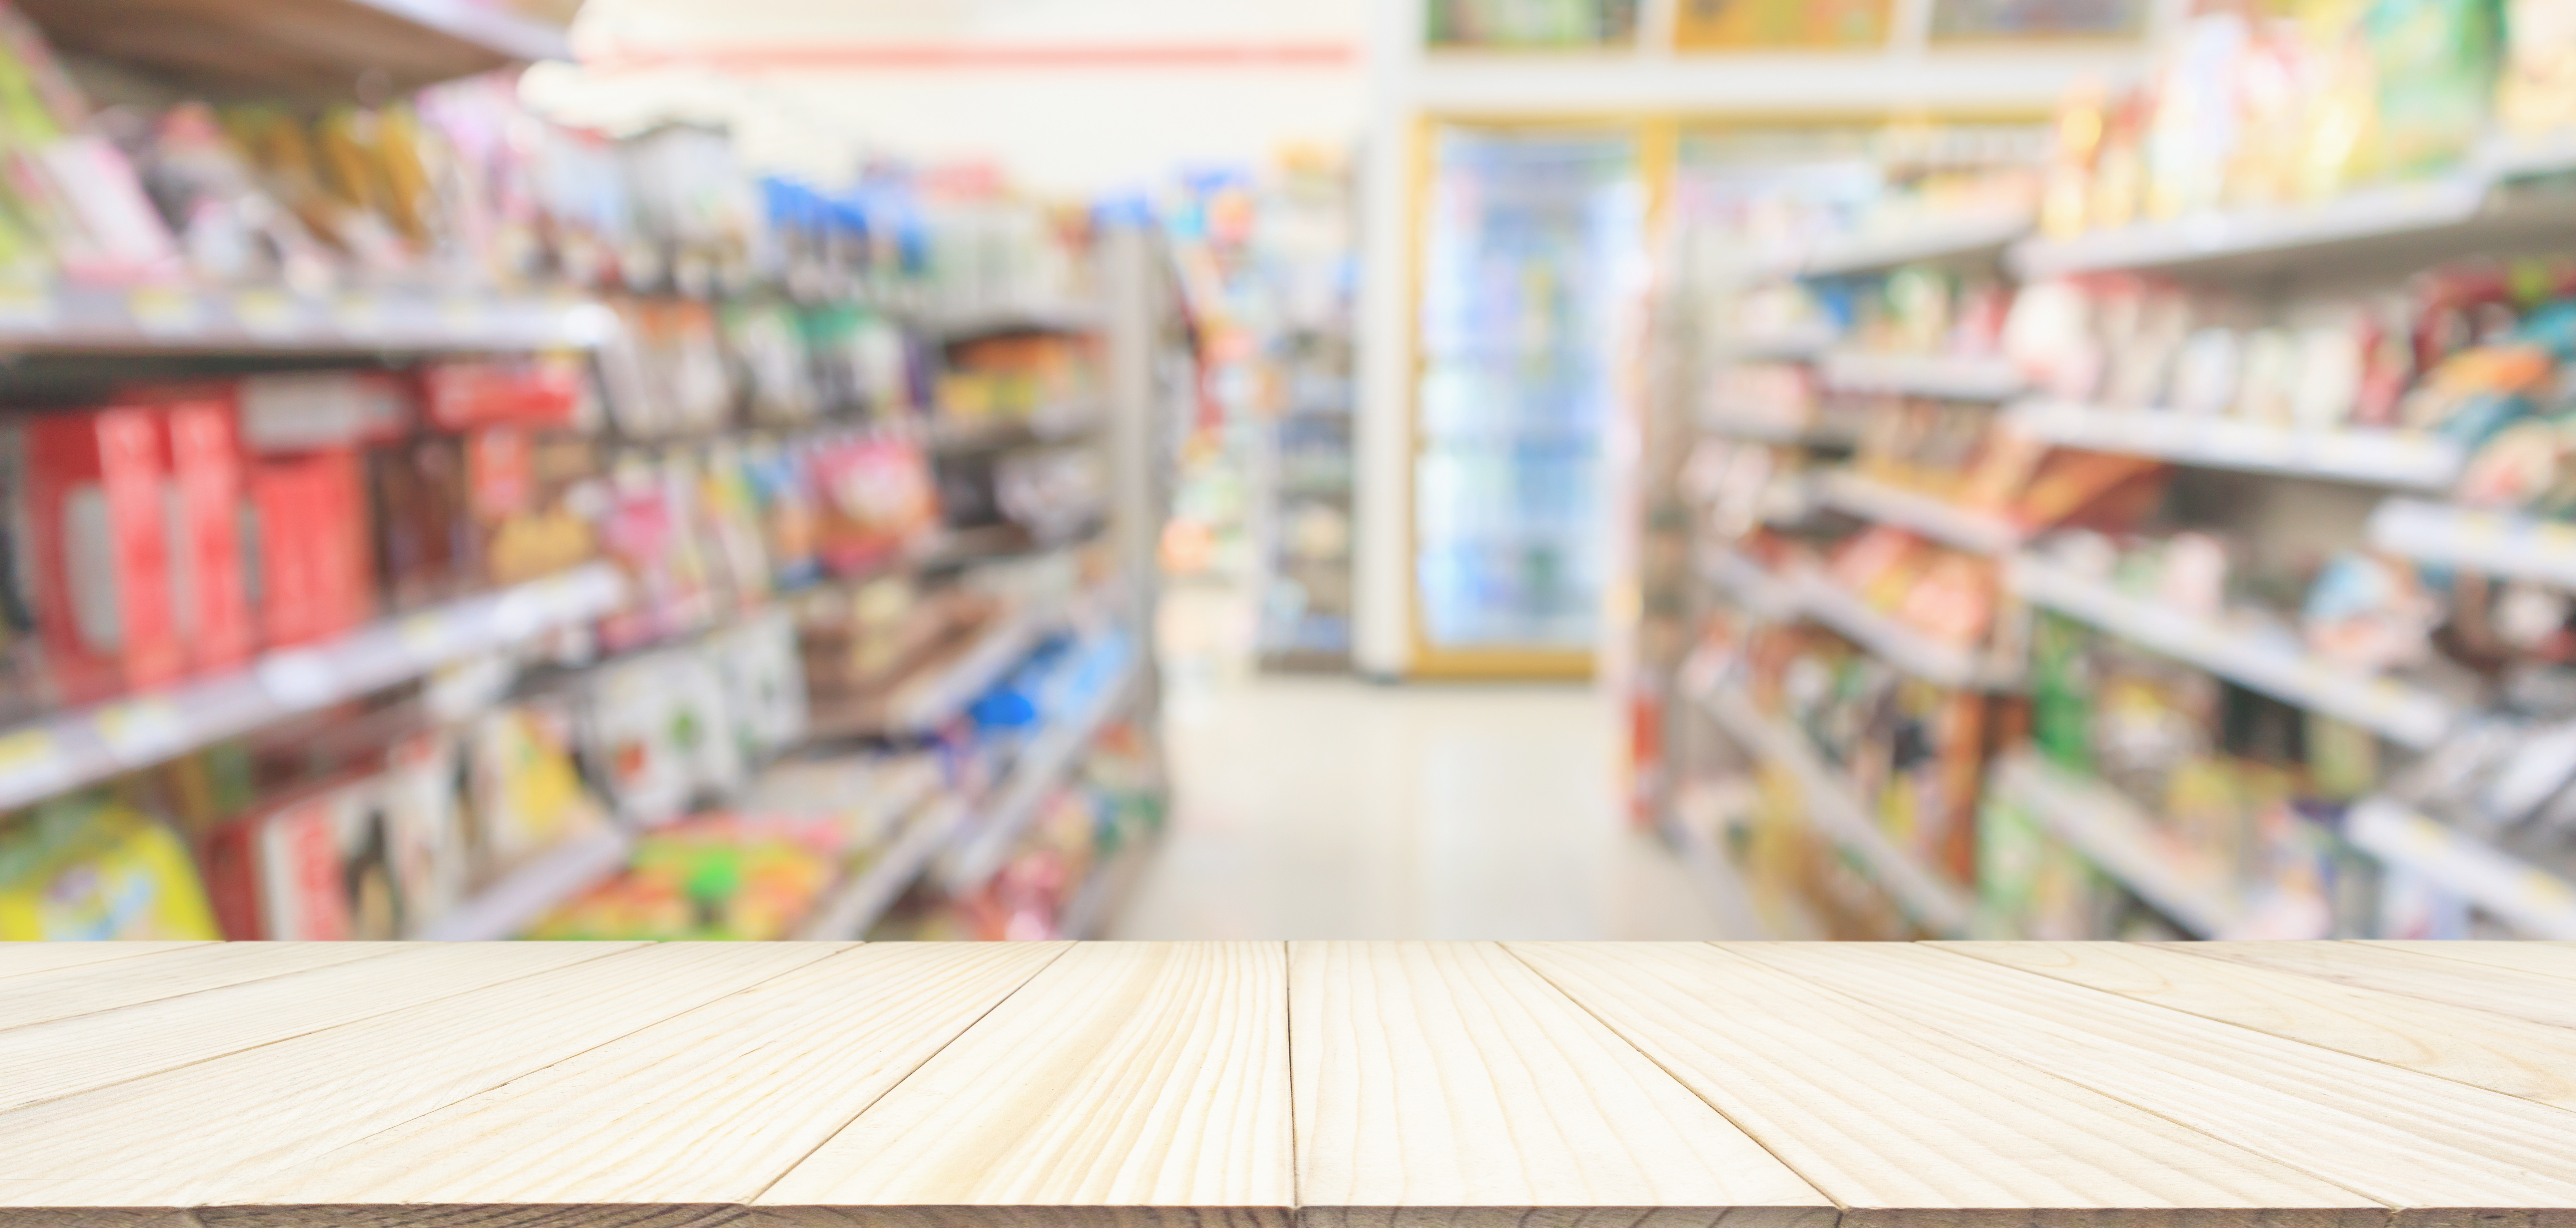 Convenience stores have historically relied on cigarette and gas sales, but today, healthy fresh food and technology are at the core of their future.